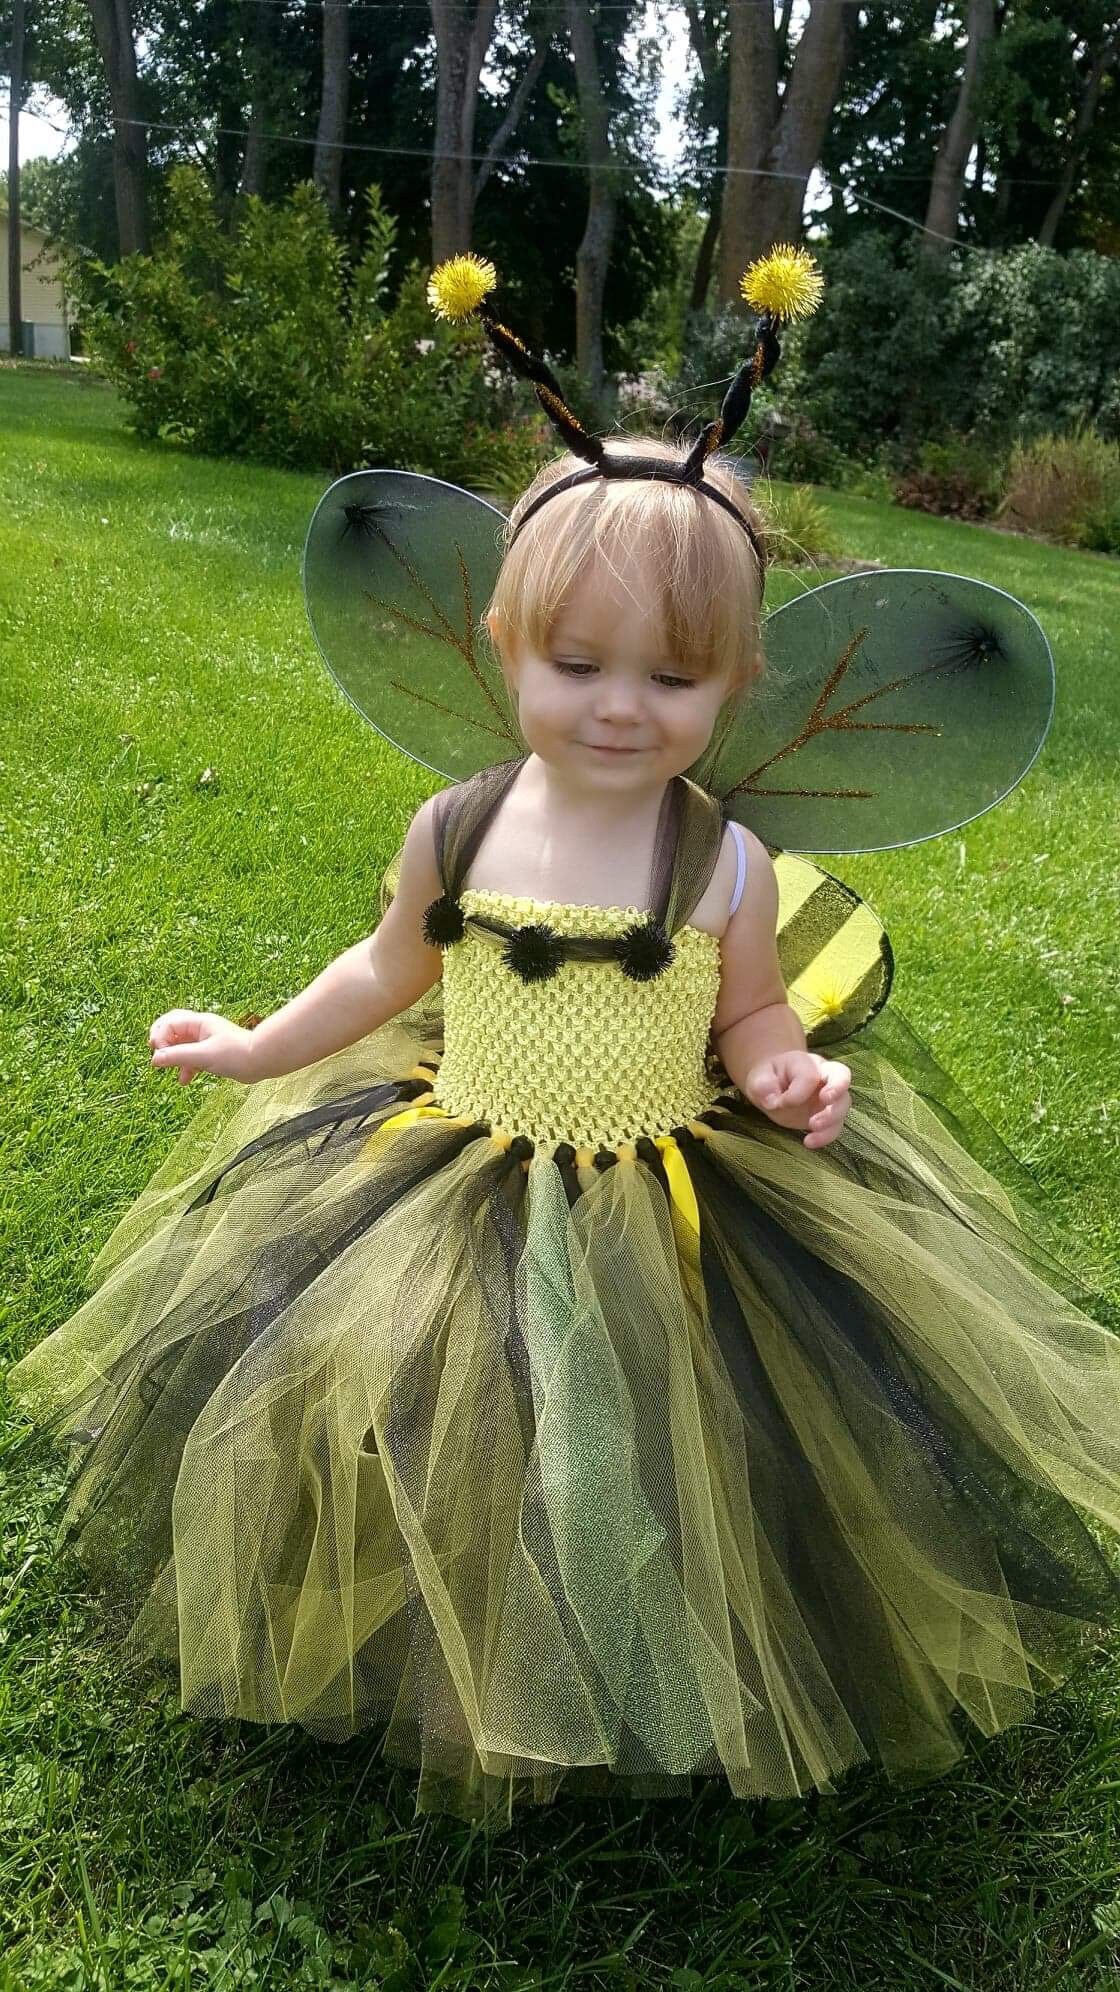 Bumble Bee Costume Bumble Bee Tutu With Wings and Headband | Etsy